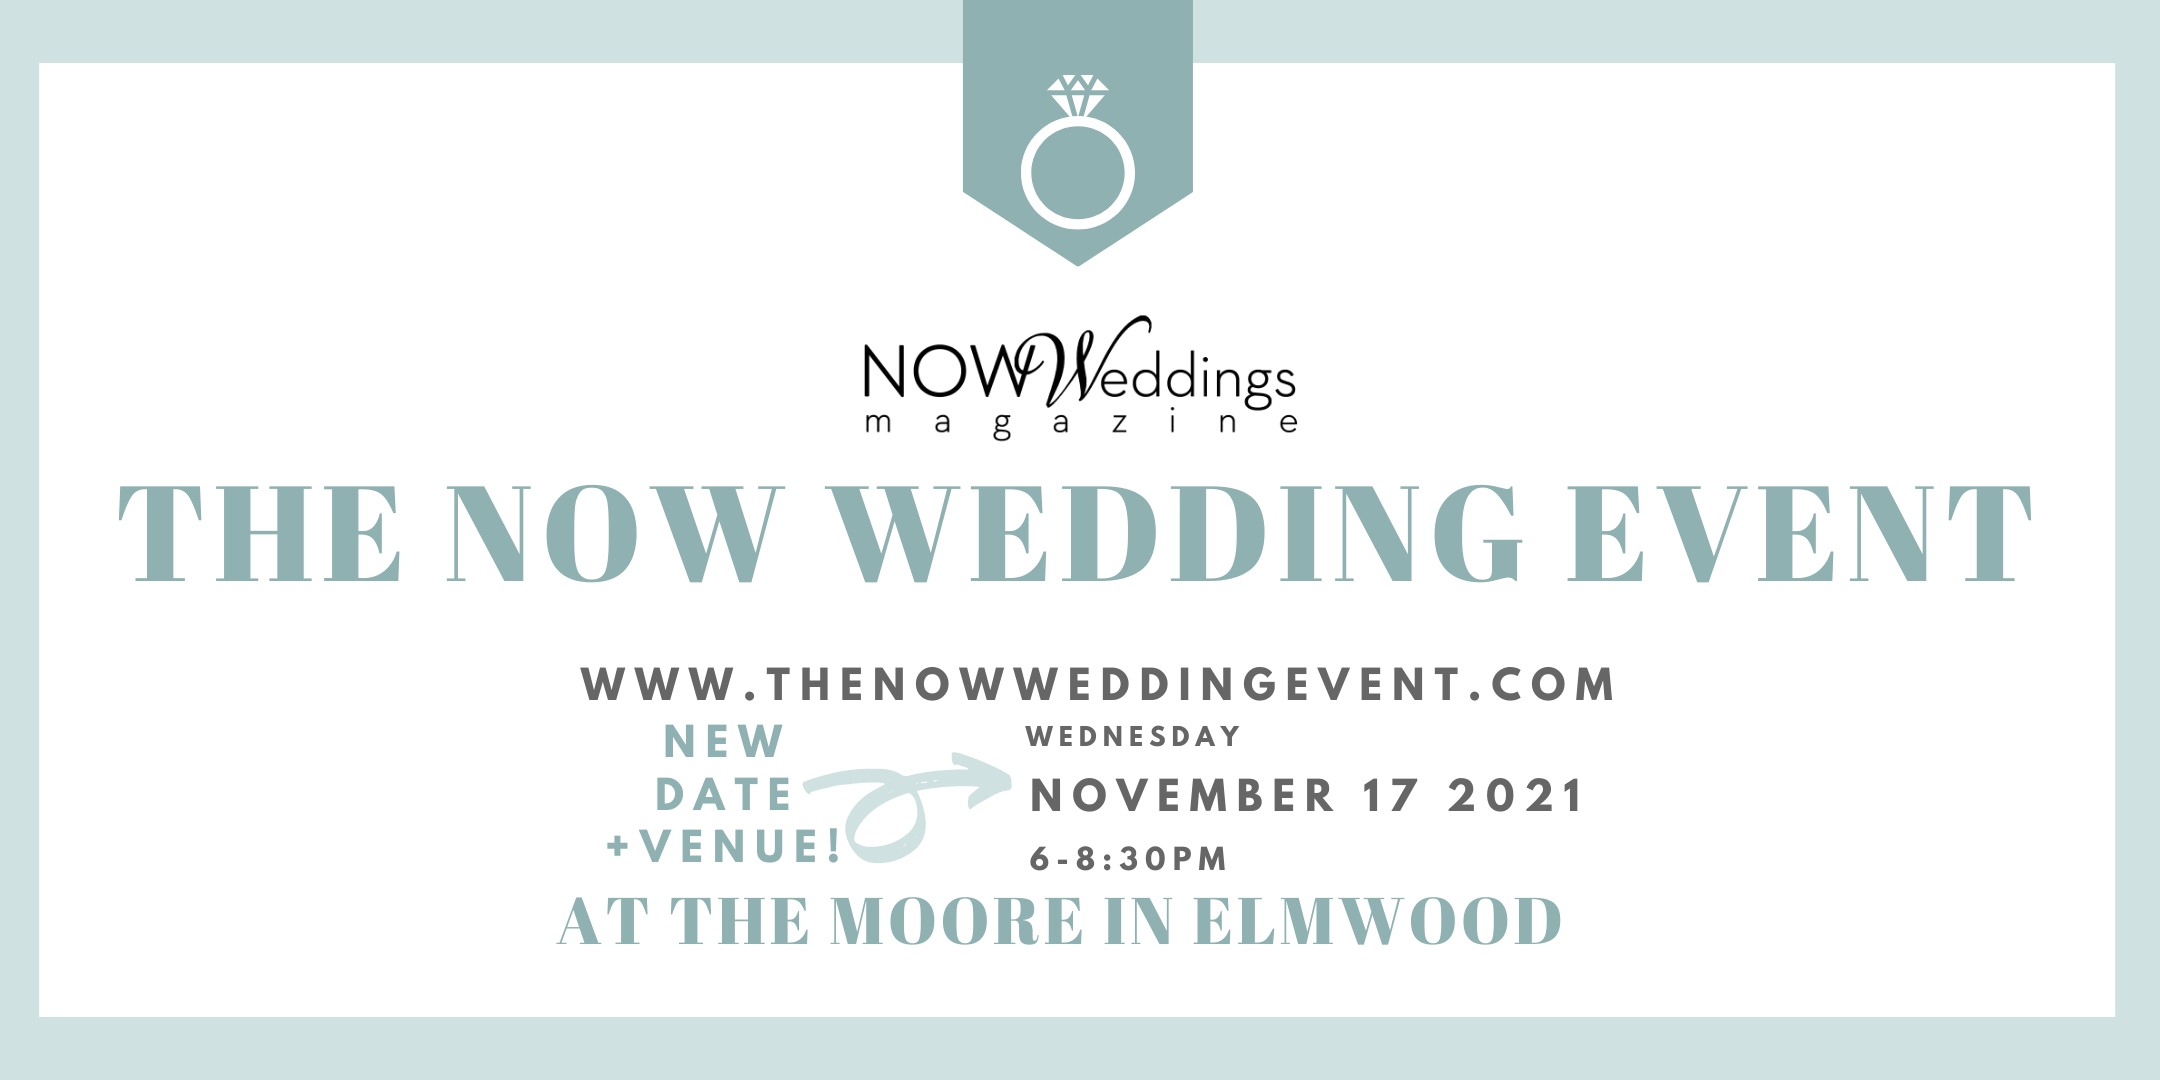 The NOW Wedding Event at The Moore Venue Nov 17 2021